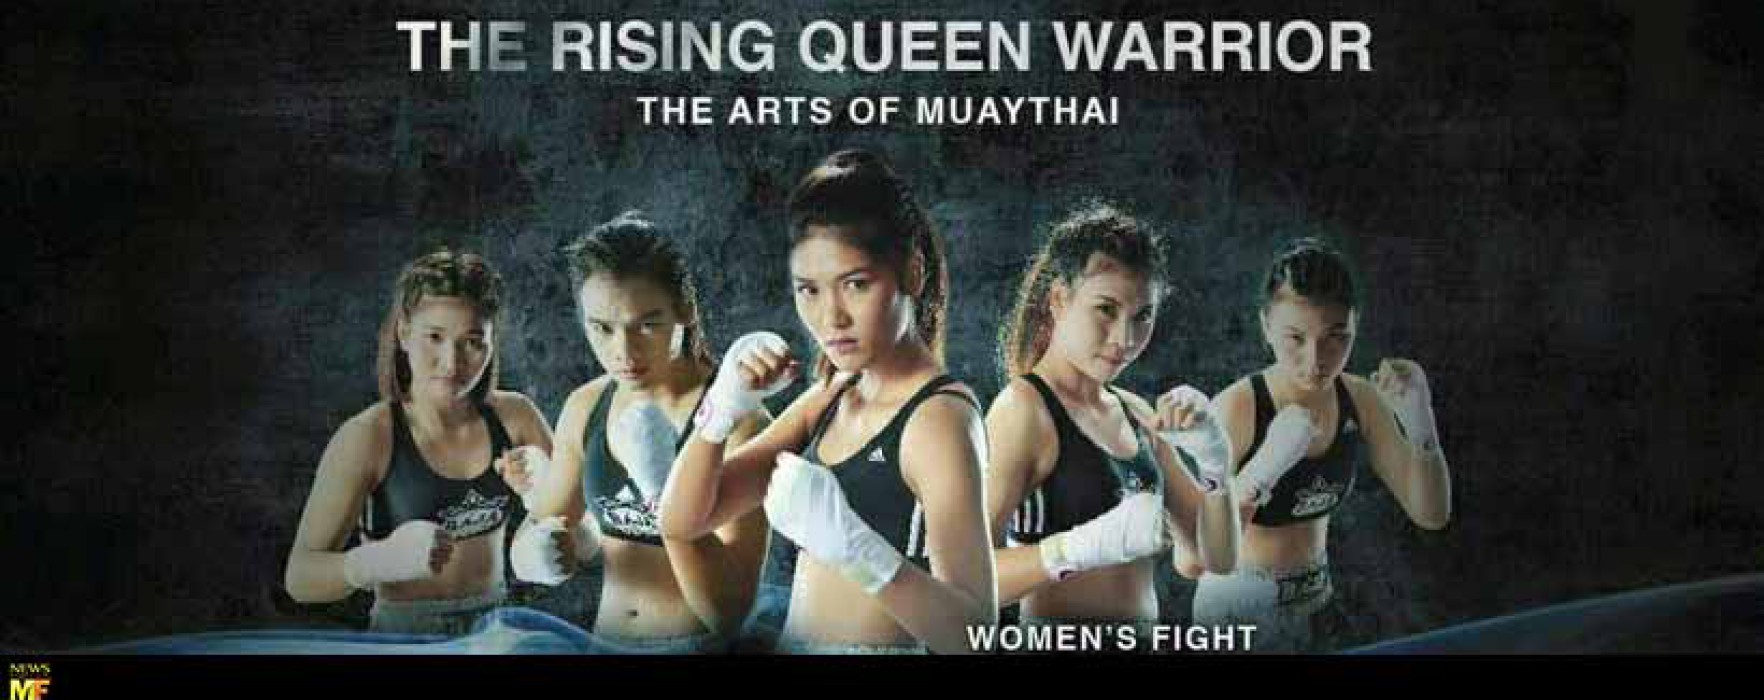 Flash News: Marloes Merza, Zaza Sor Aree etc at «The Rising Queen Warrior» – Queens birthday – Chiangrai